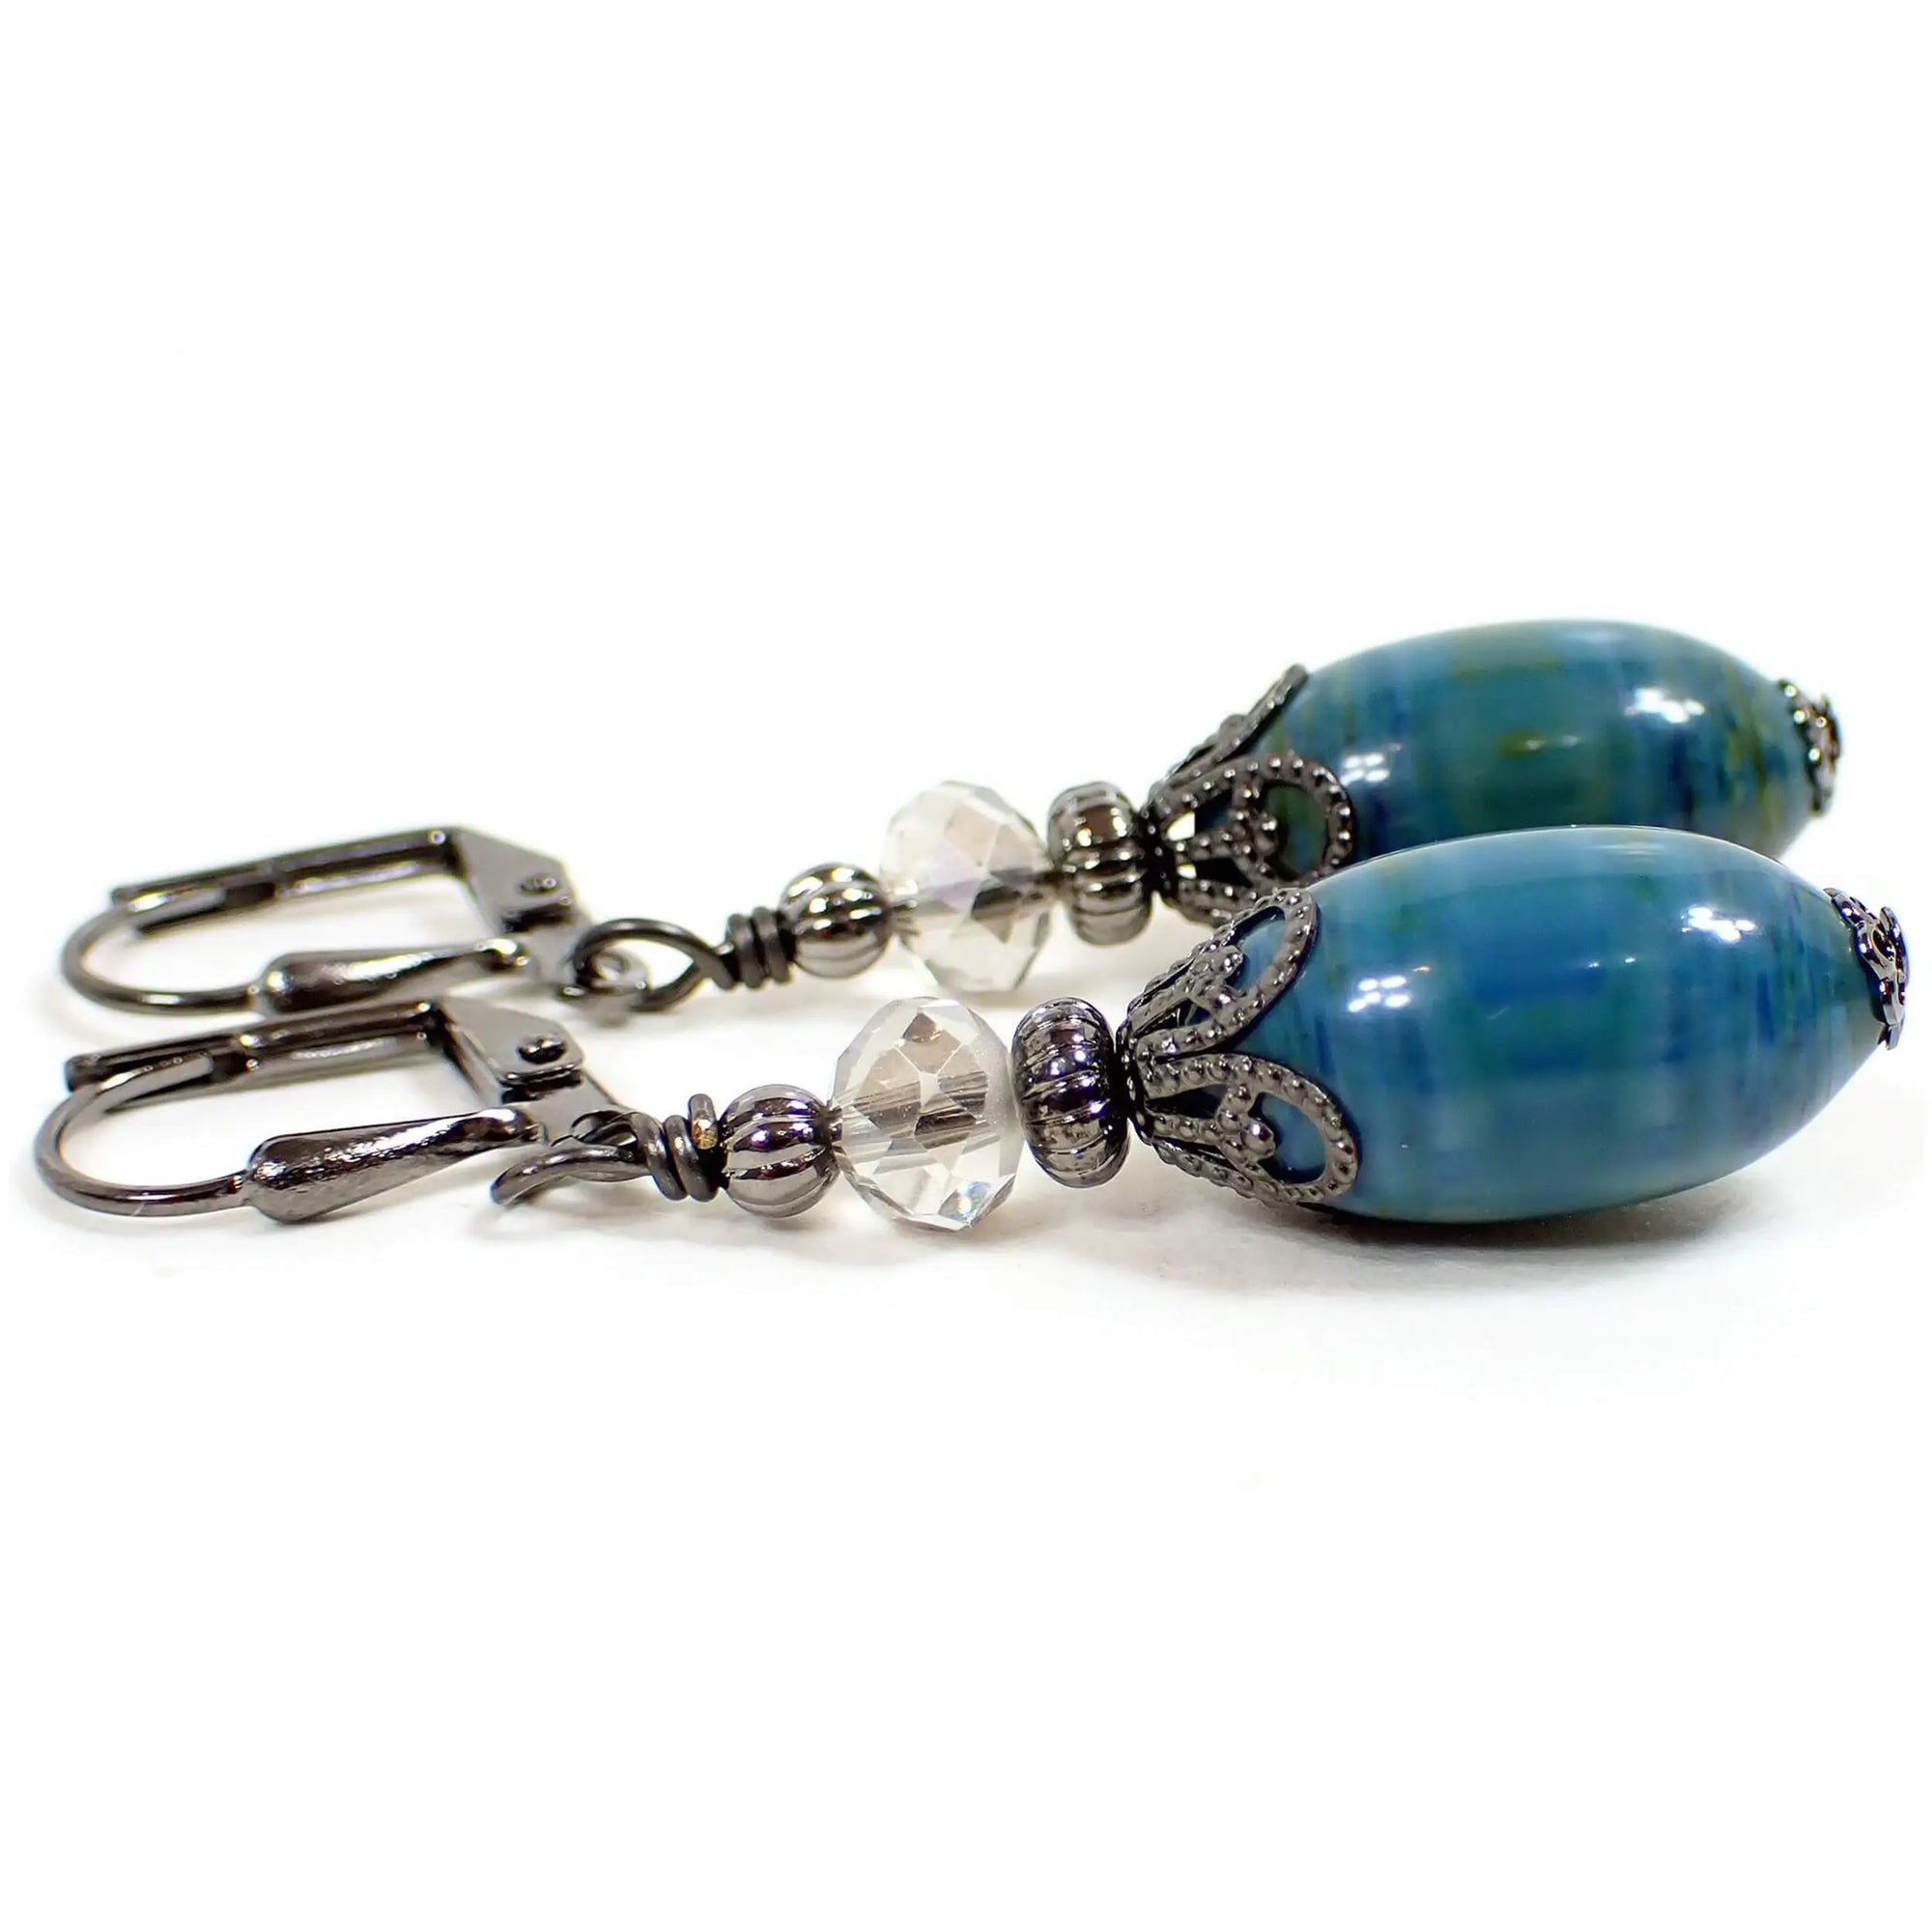 Side view of the handmade earrings with vintage lucite beads. The metal is gunmetal gray in color. There are faceted glass crystal beads at the top in a very light gray color. The bottom lucite beads are oval shaped and have marbled areas with different shades of blue and green. Each beads has a different pattern for a unique appearance.